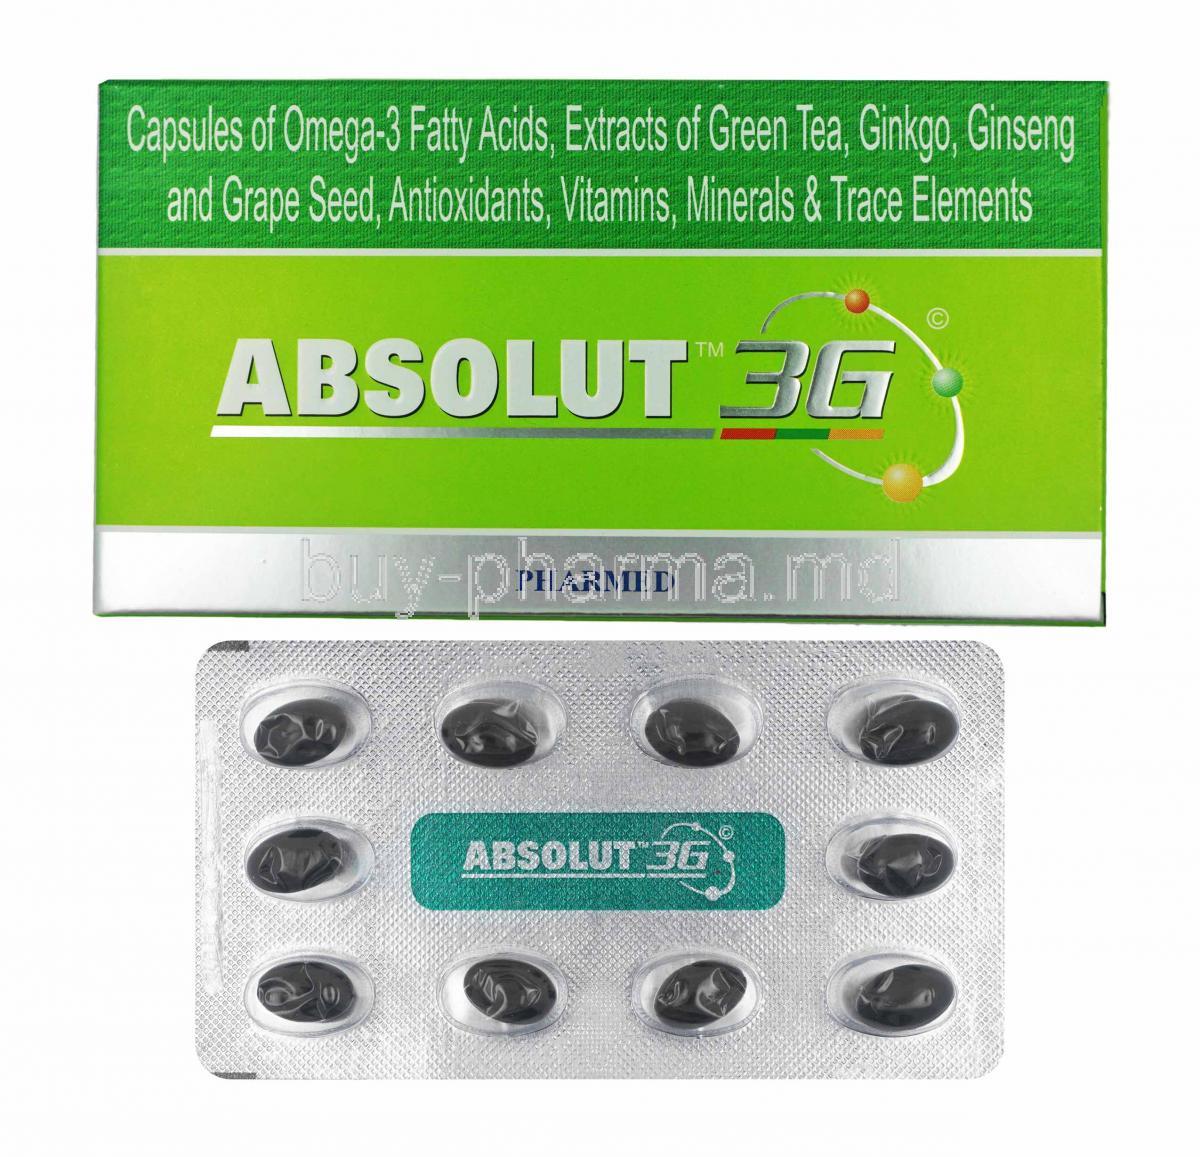 Absolut 3G box and capsules